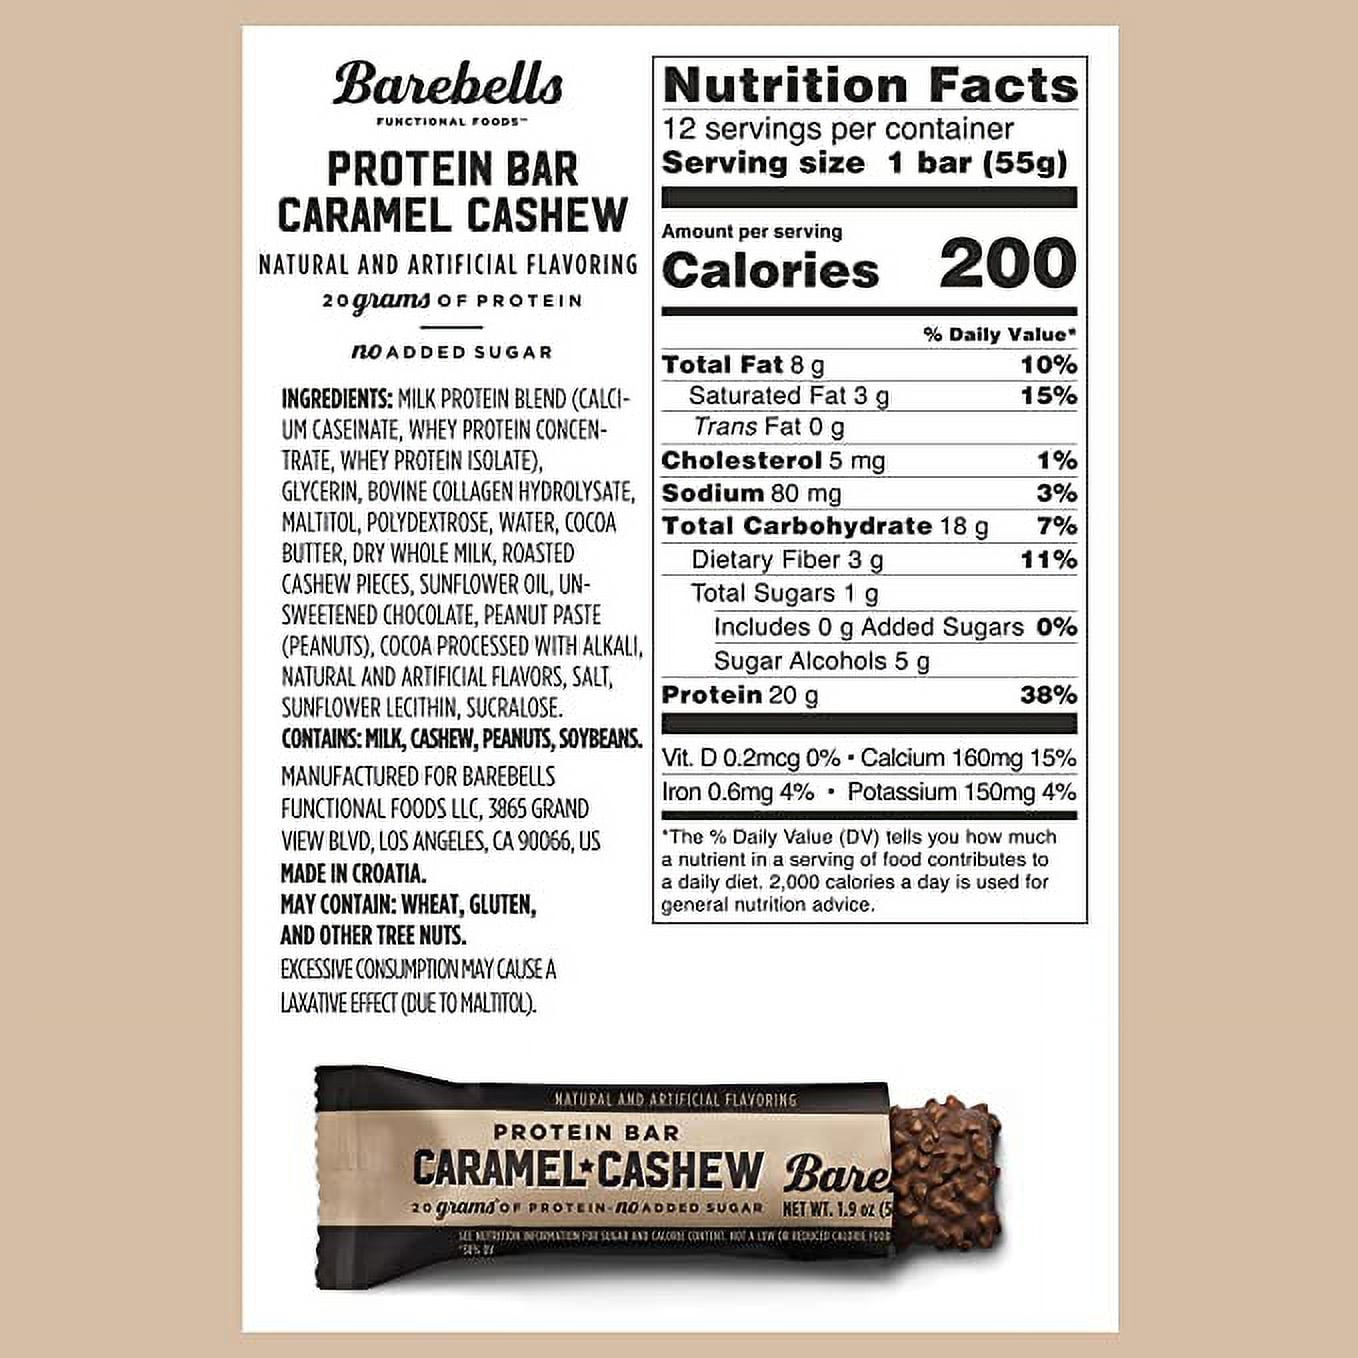 Soft Protein Bars by Barebells by Barebells - Affordable Protein